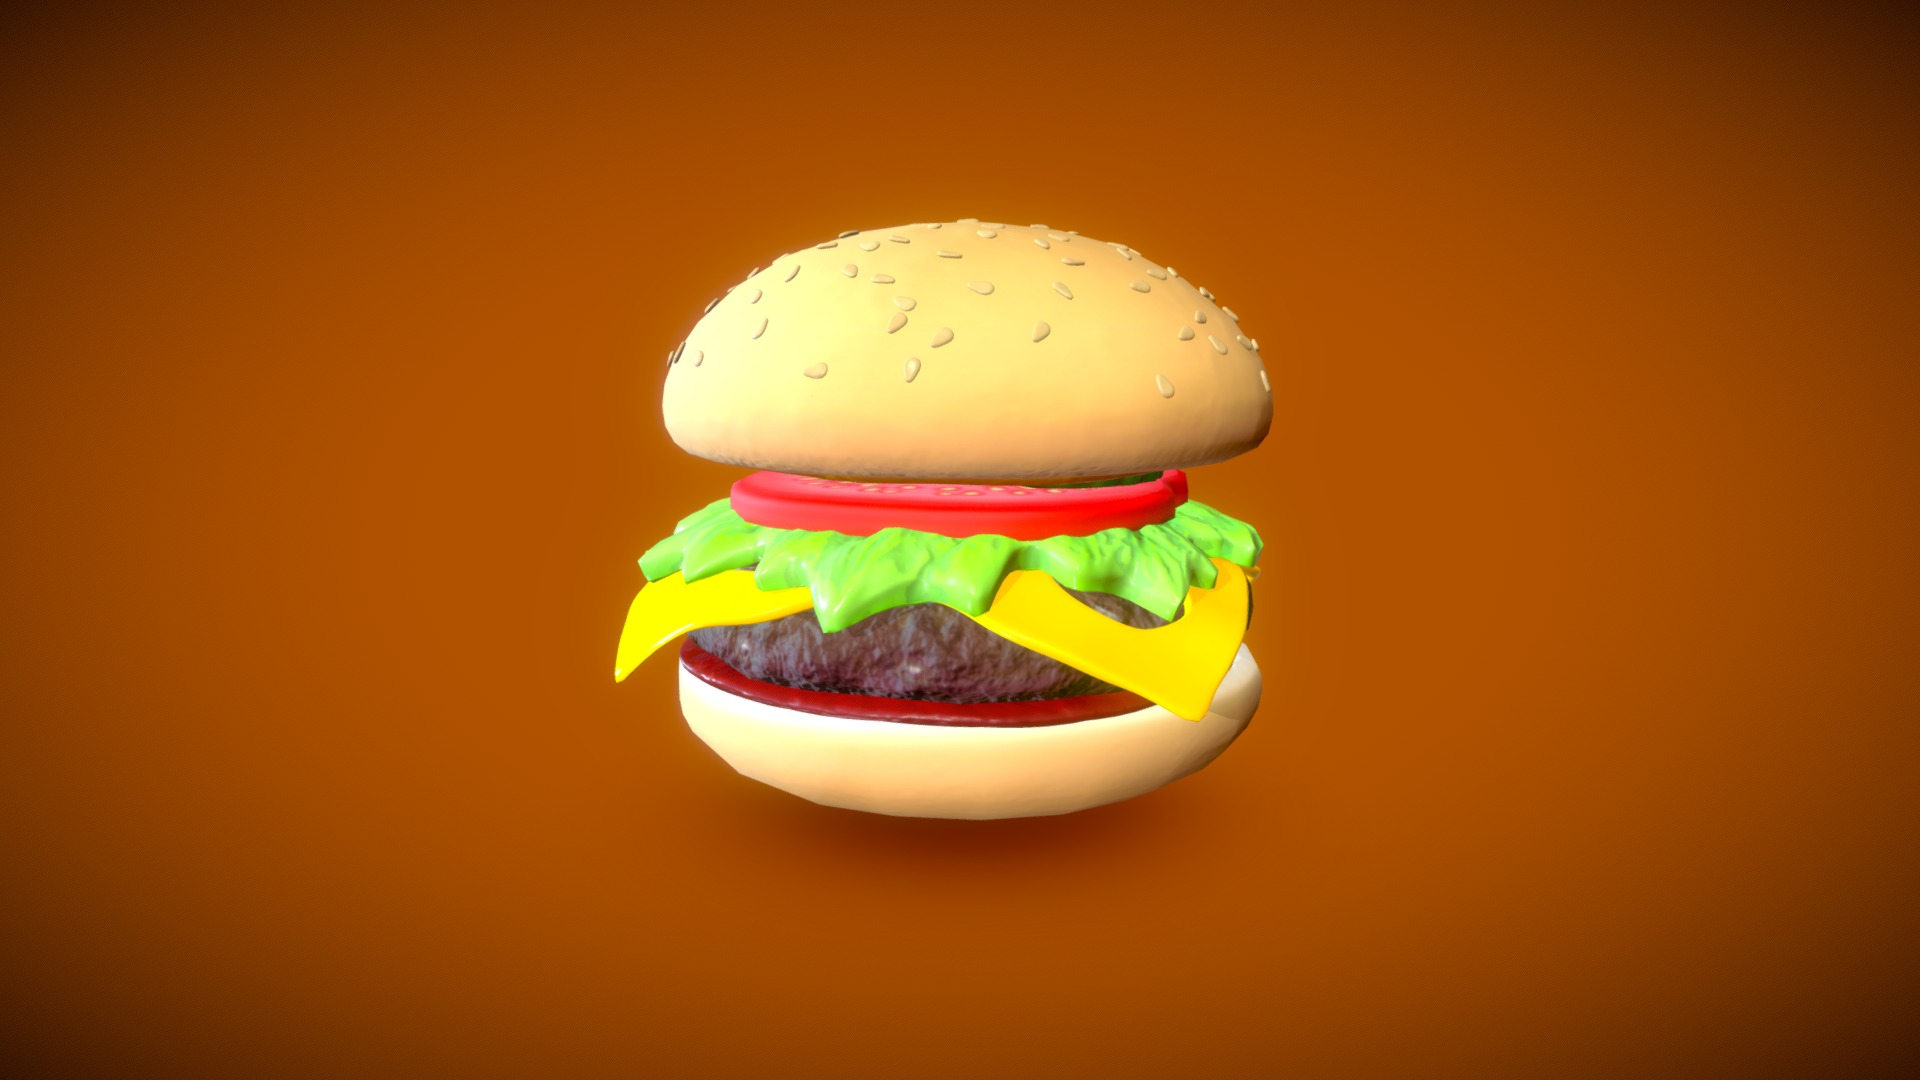 3D model Burger - This is a 3D model of the Burger. The 3D model is about a hamburger with lettuce and tomato.